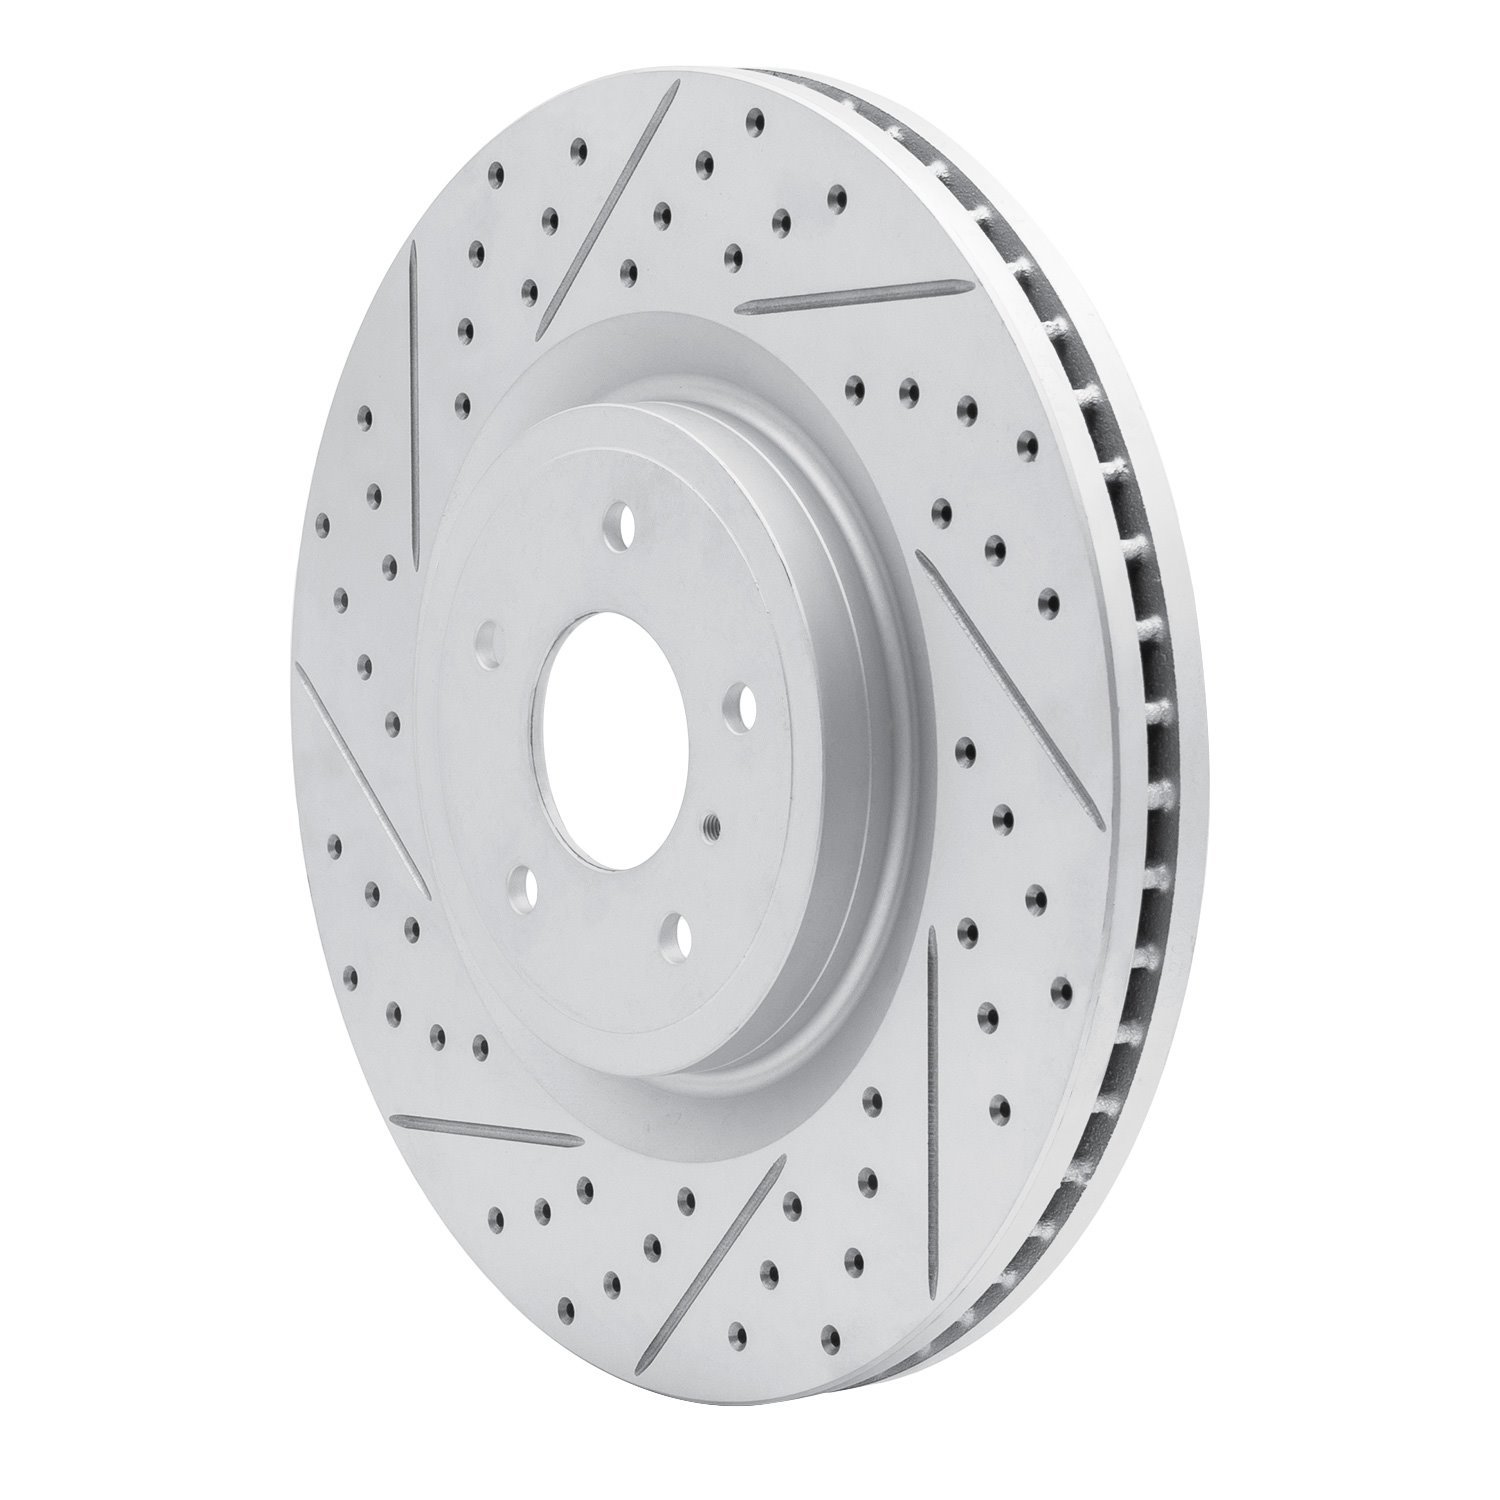 830-68012L Geoperformance Drilled/Slotted Brake Rotor, Fits Select Infiniti/Nissan, Position: Front Left